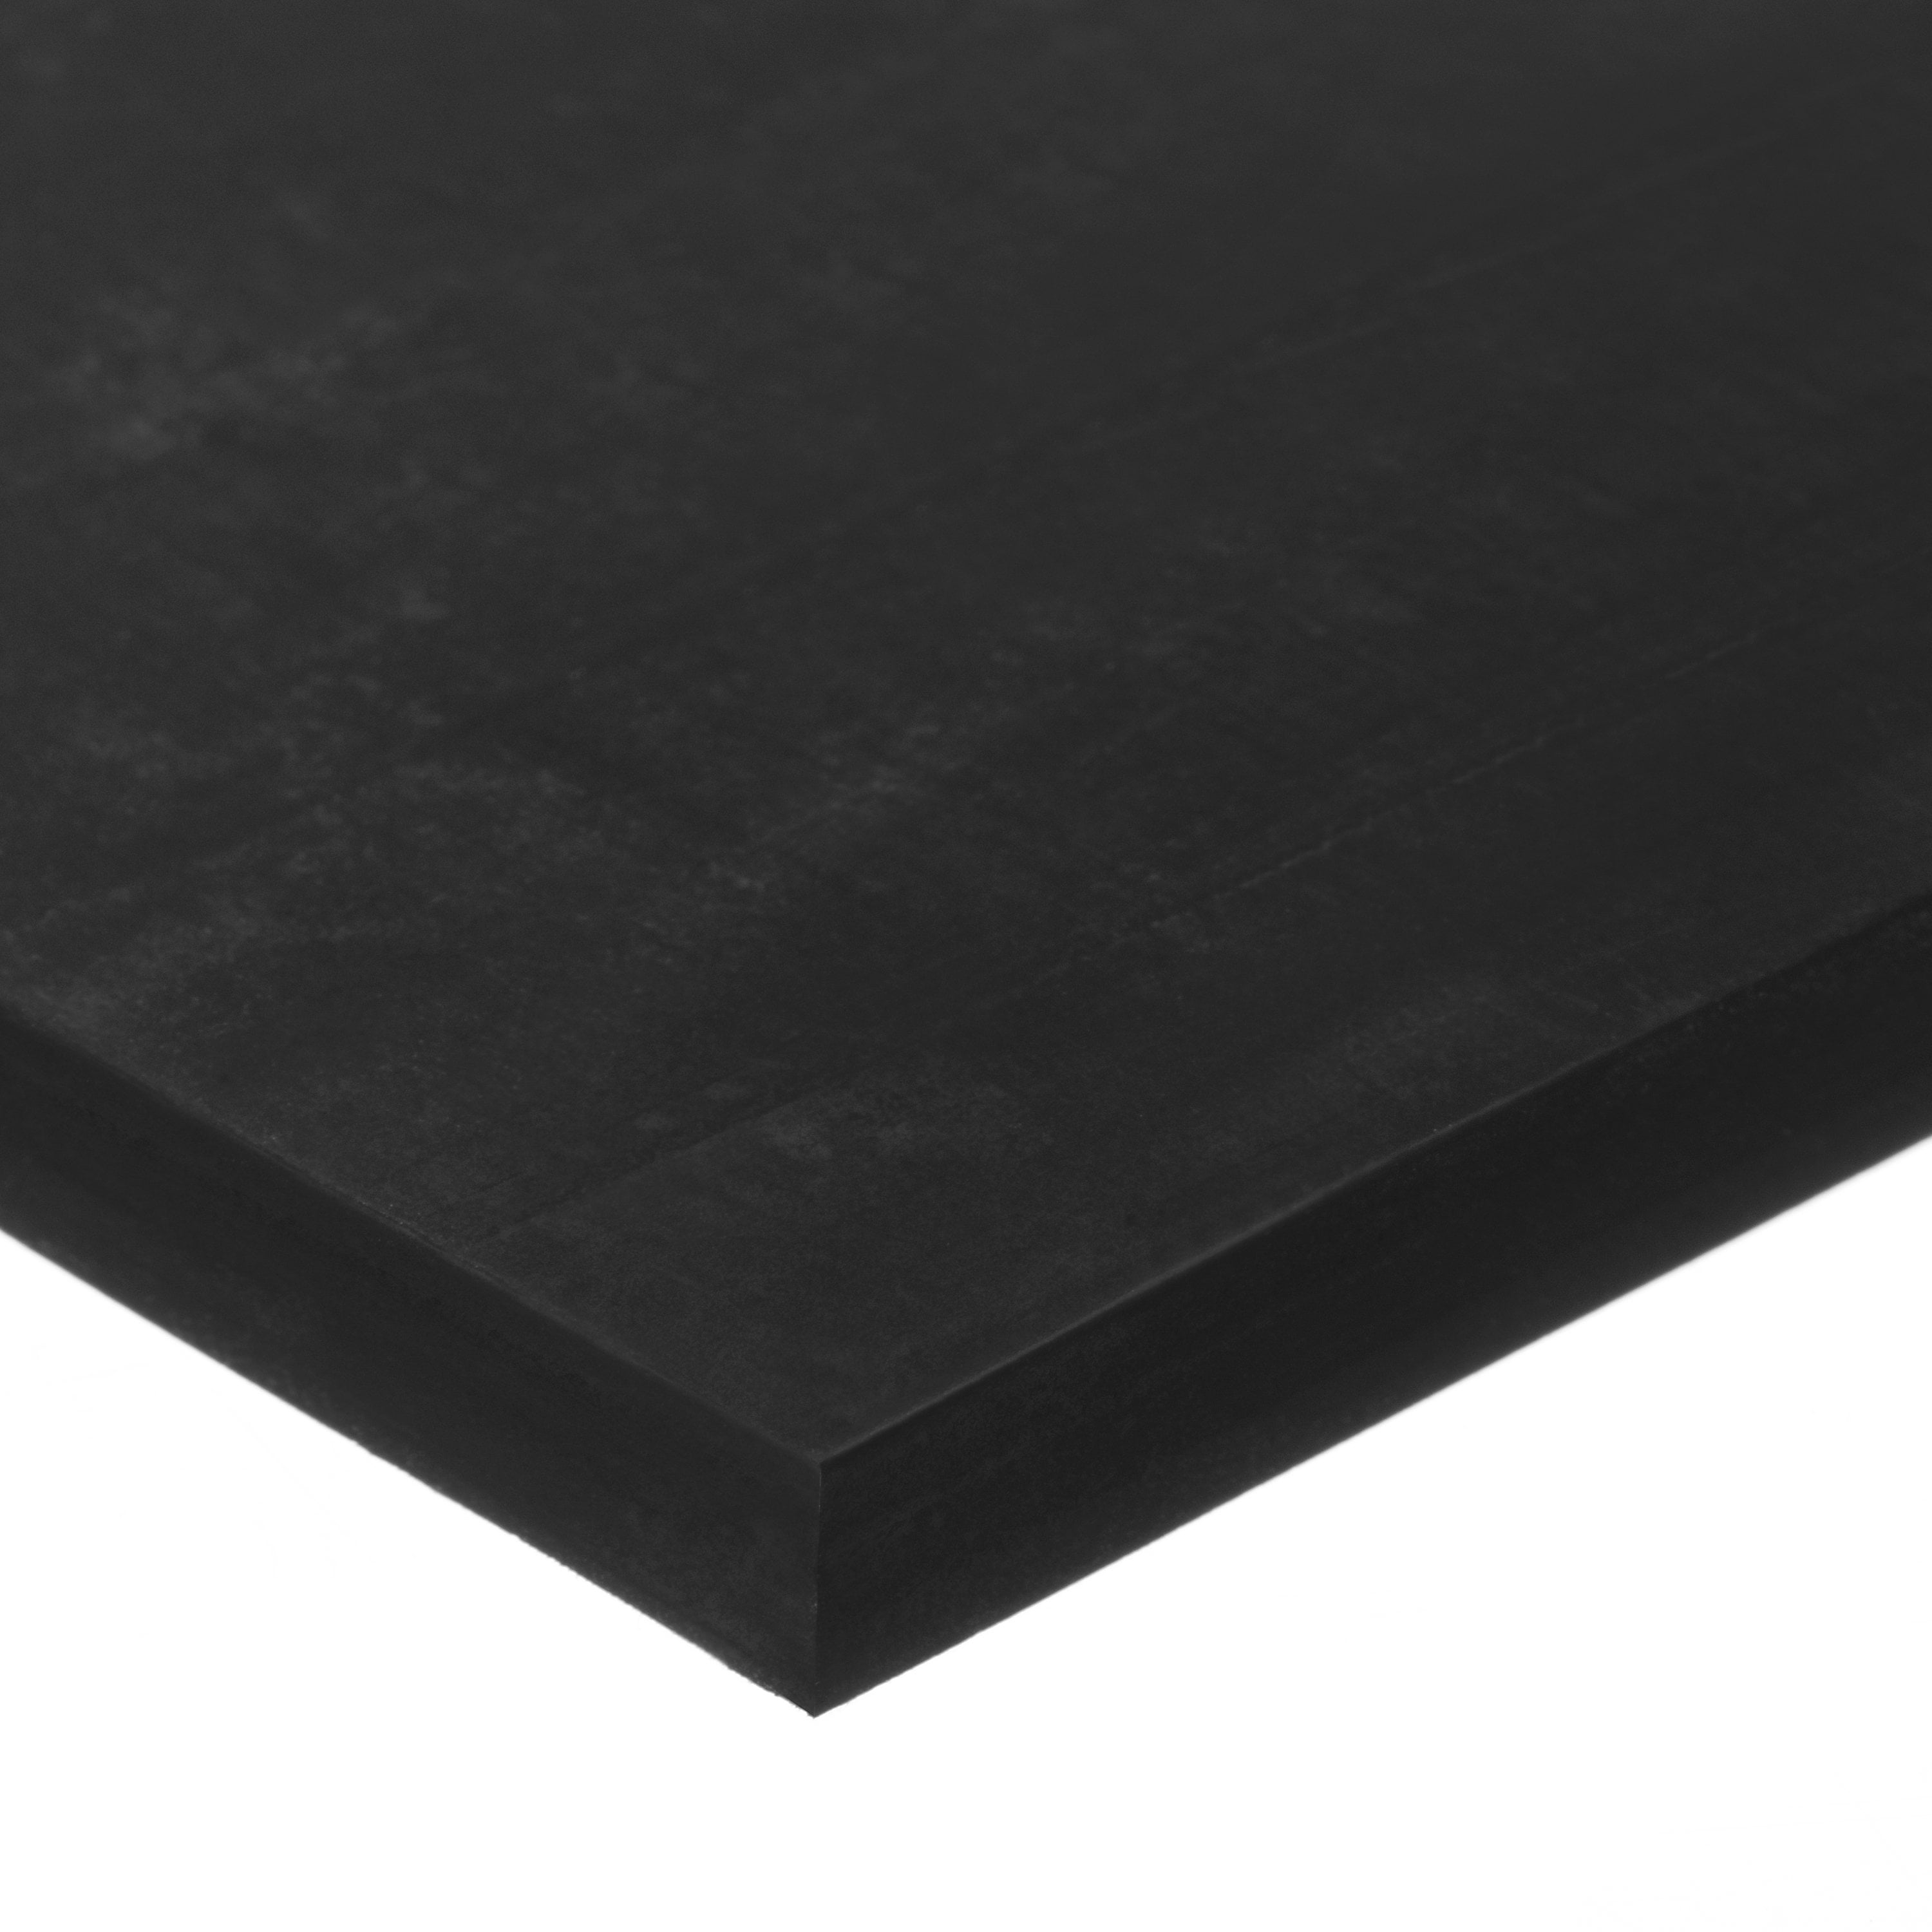 60A 1/32 Thick x 36 Wide x 36 Long Ultra Strength Buna-N Rubber Sheet with Acrylic Adhesive 